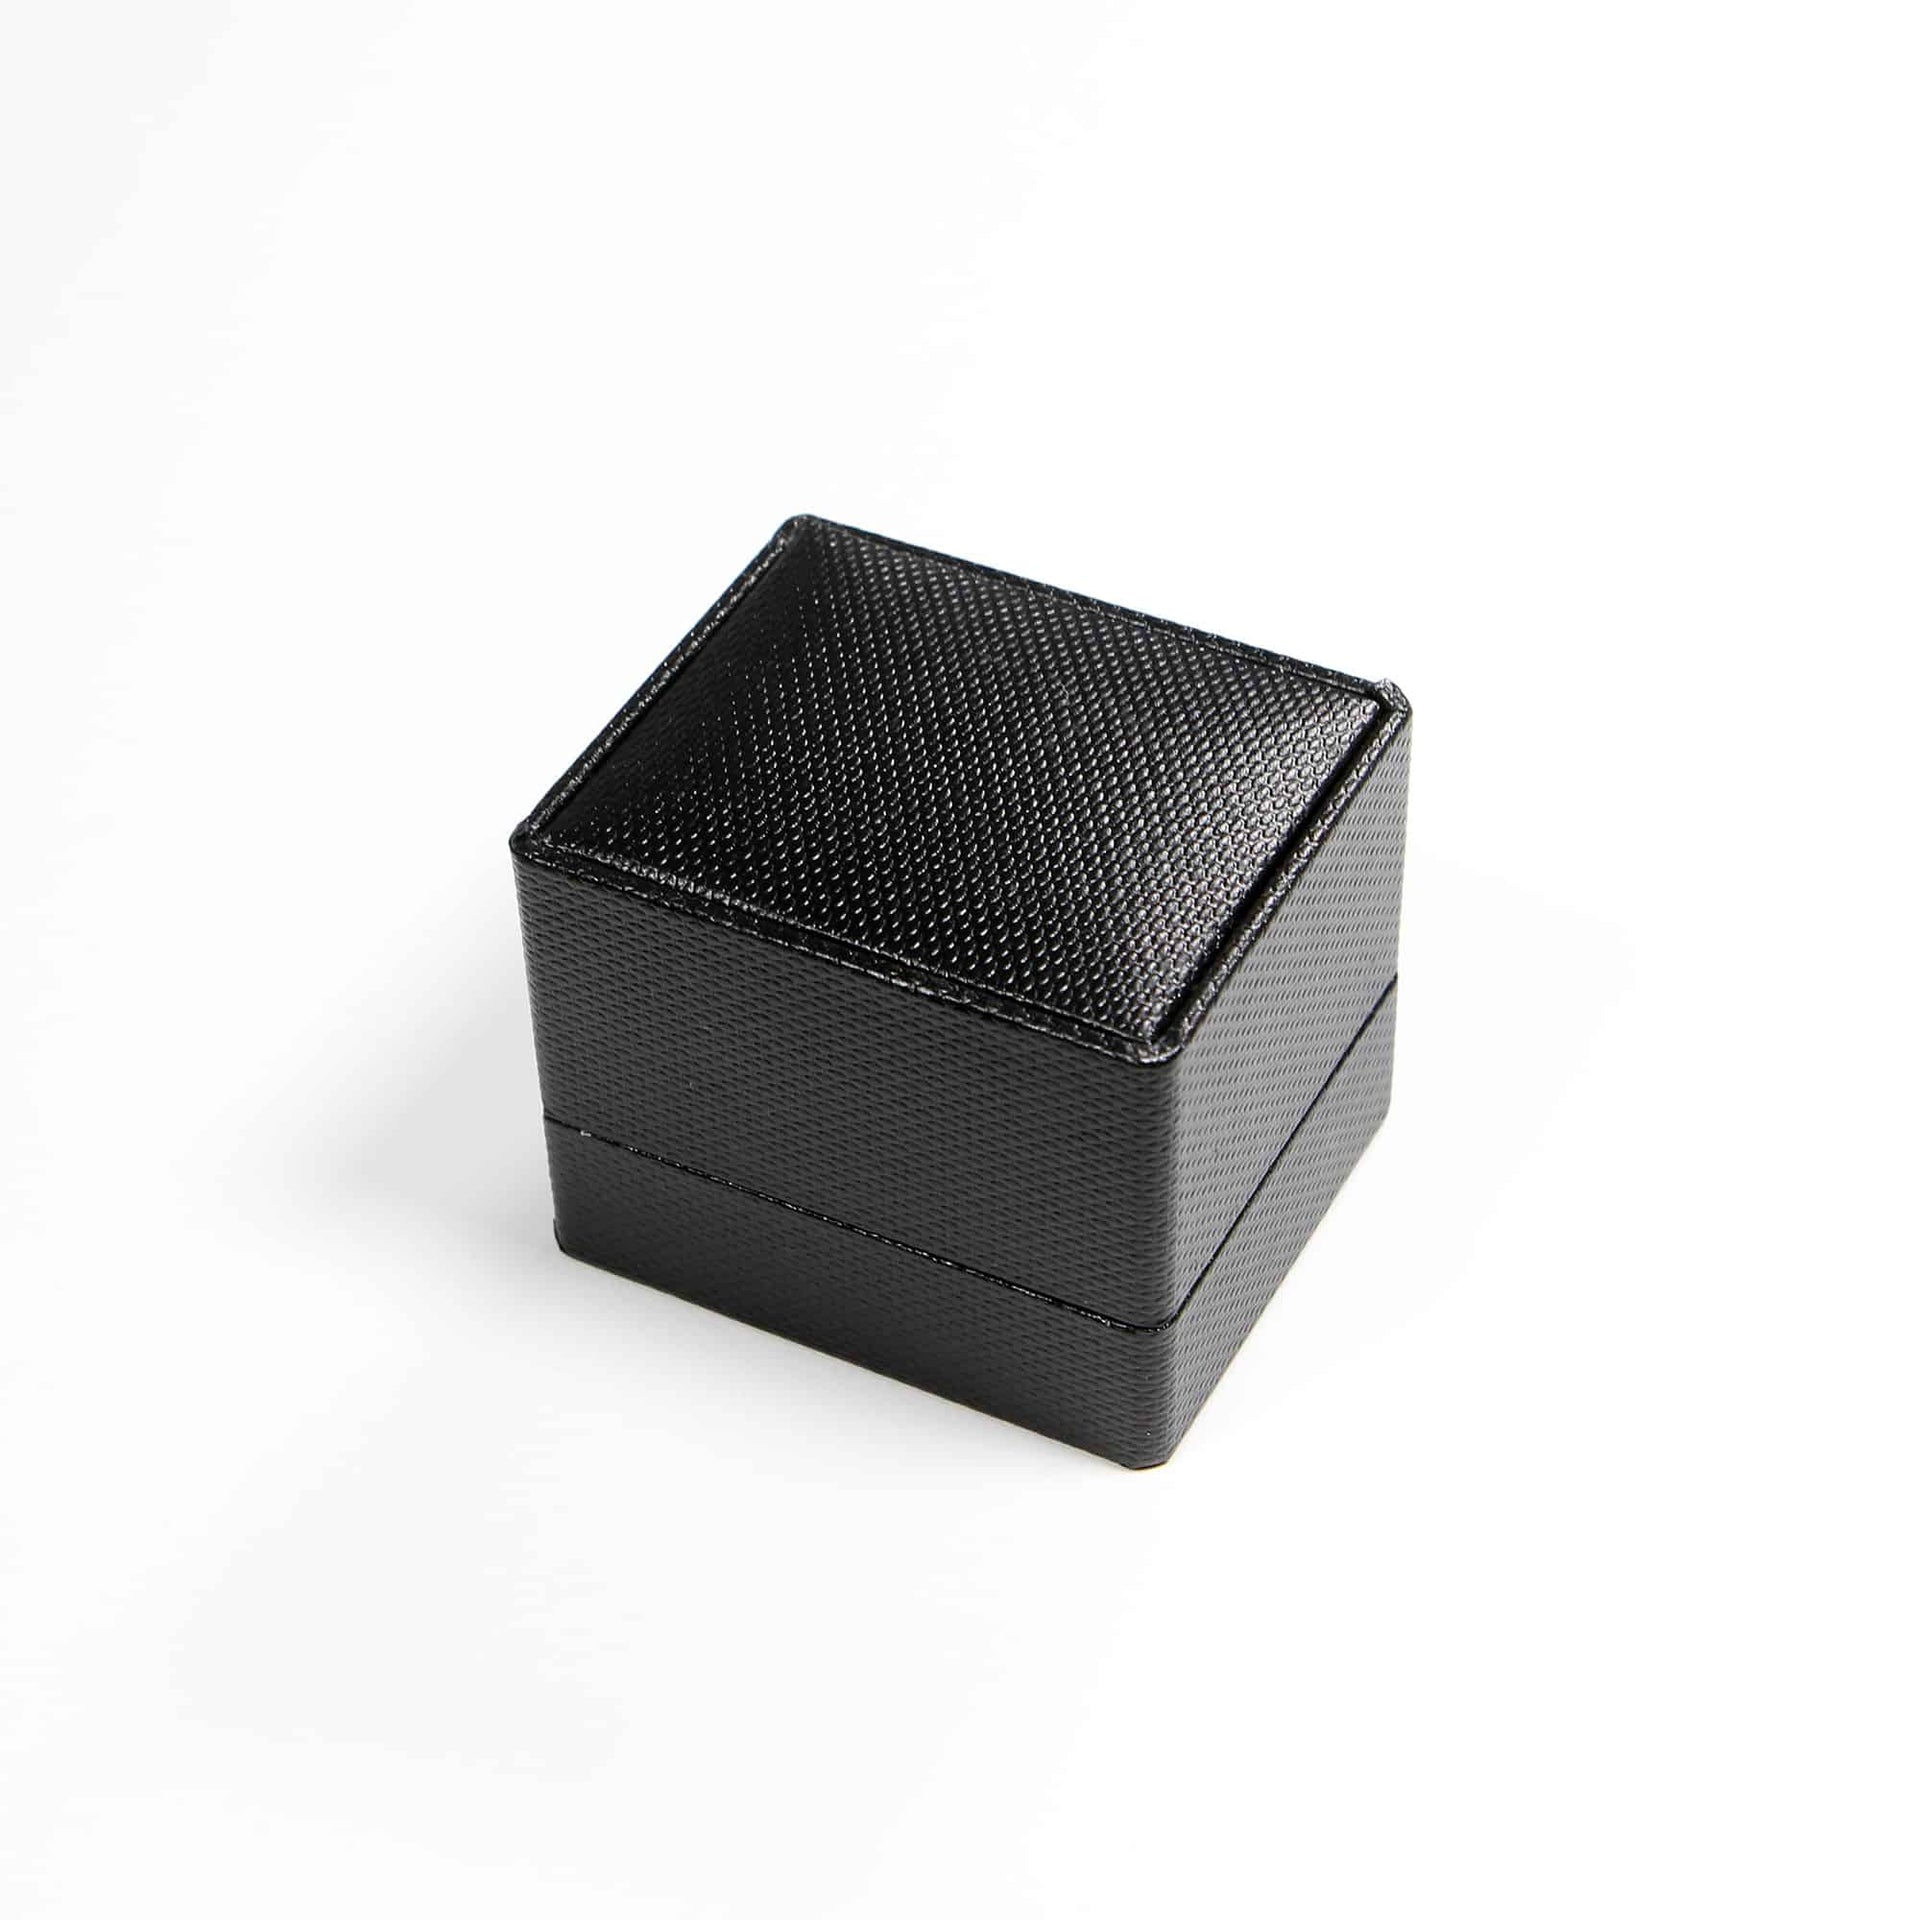 This is a modern black  ring box that has a built in led light pointed down at the ring. Great for weddings, proposals, ,engagements or just to show off your gems!